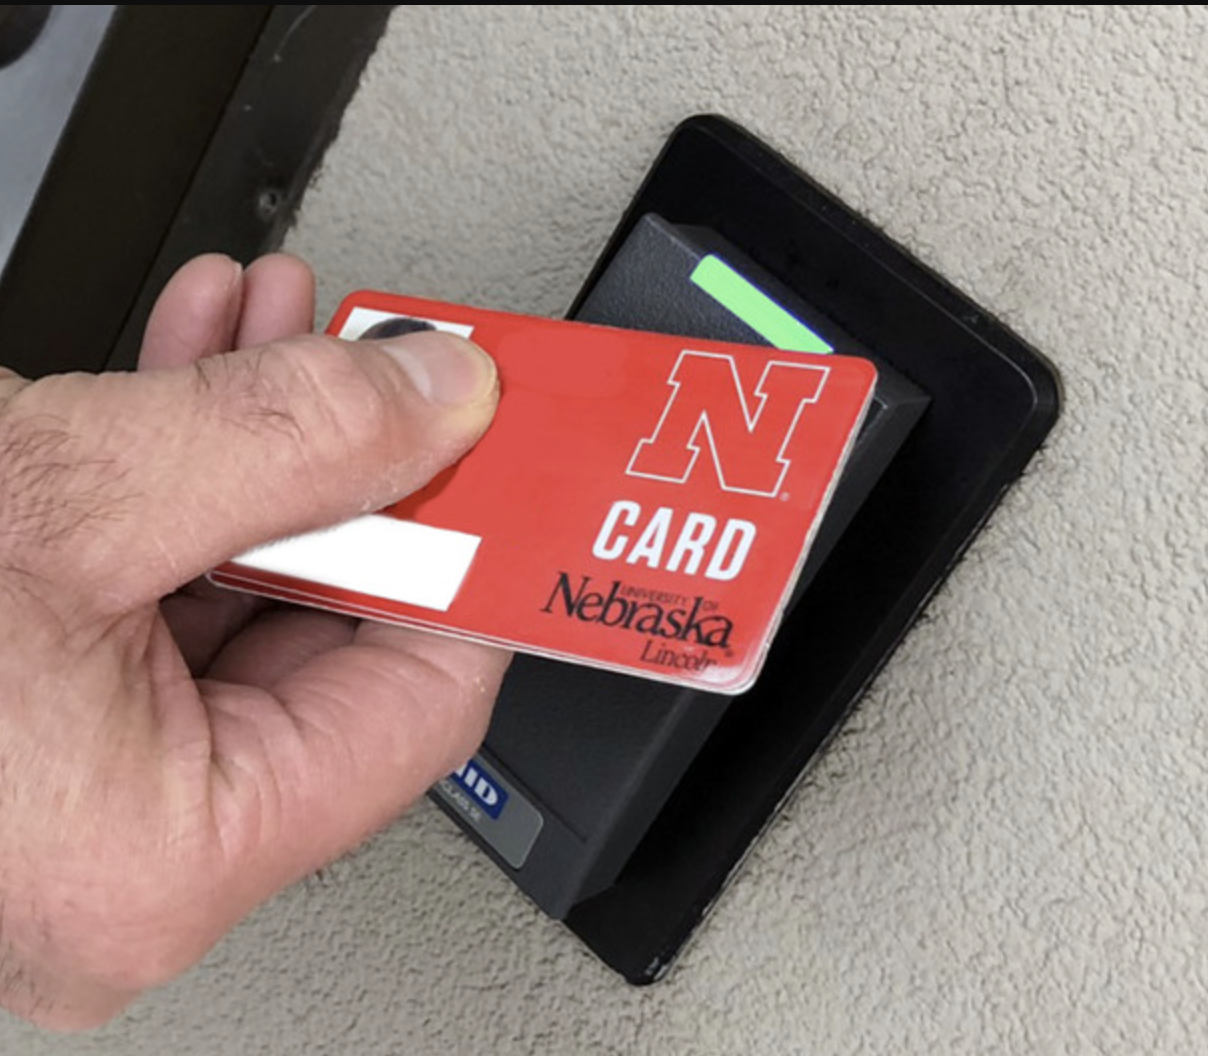 Keep your Ncard with you to access these eight free campus perks.